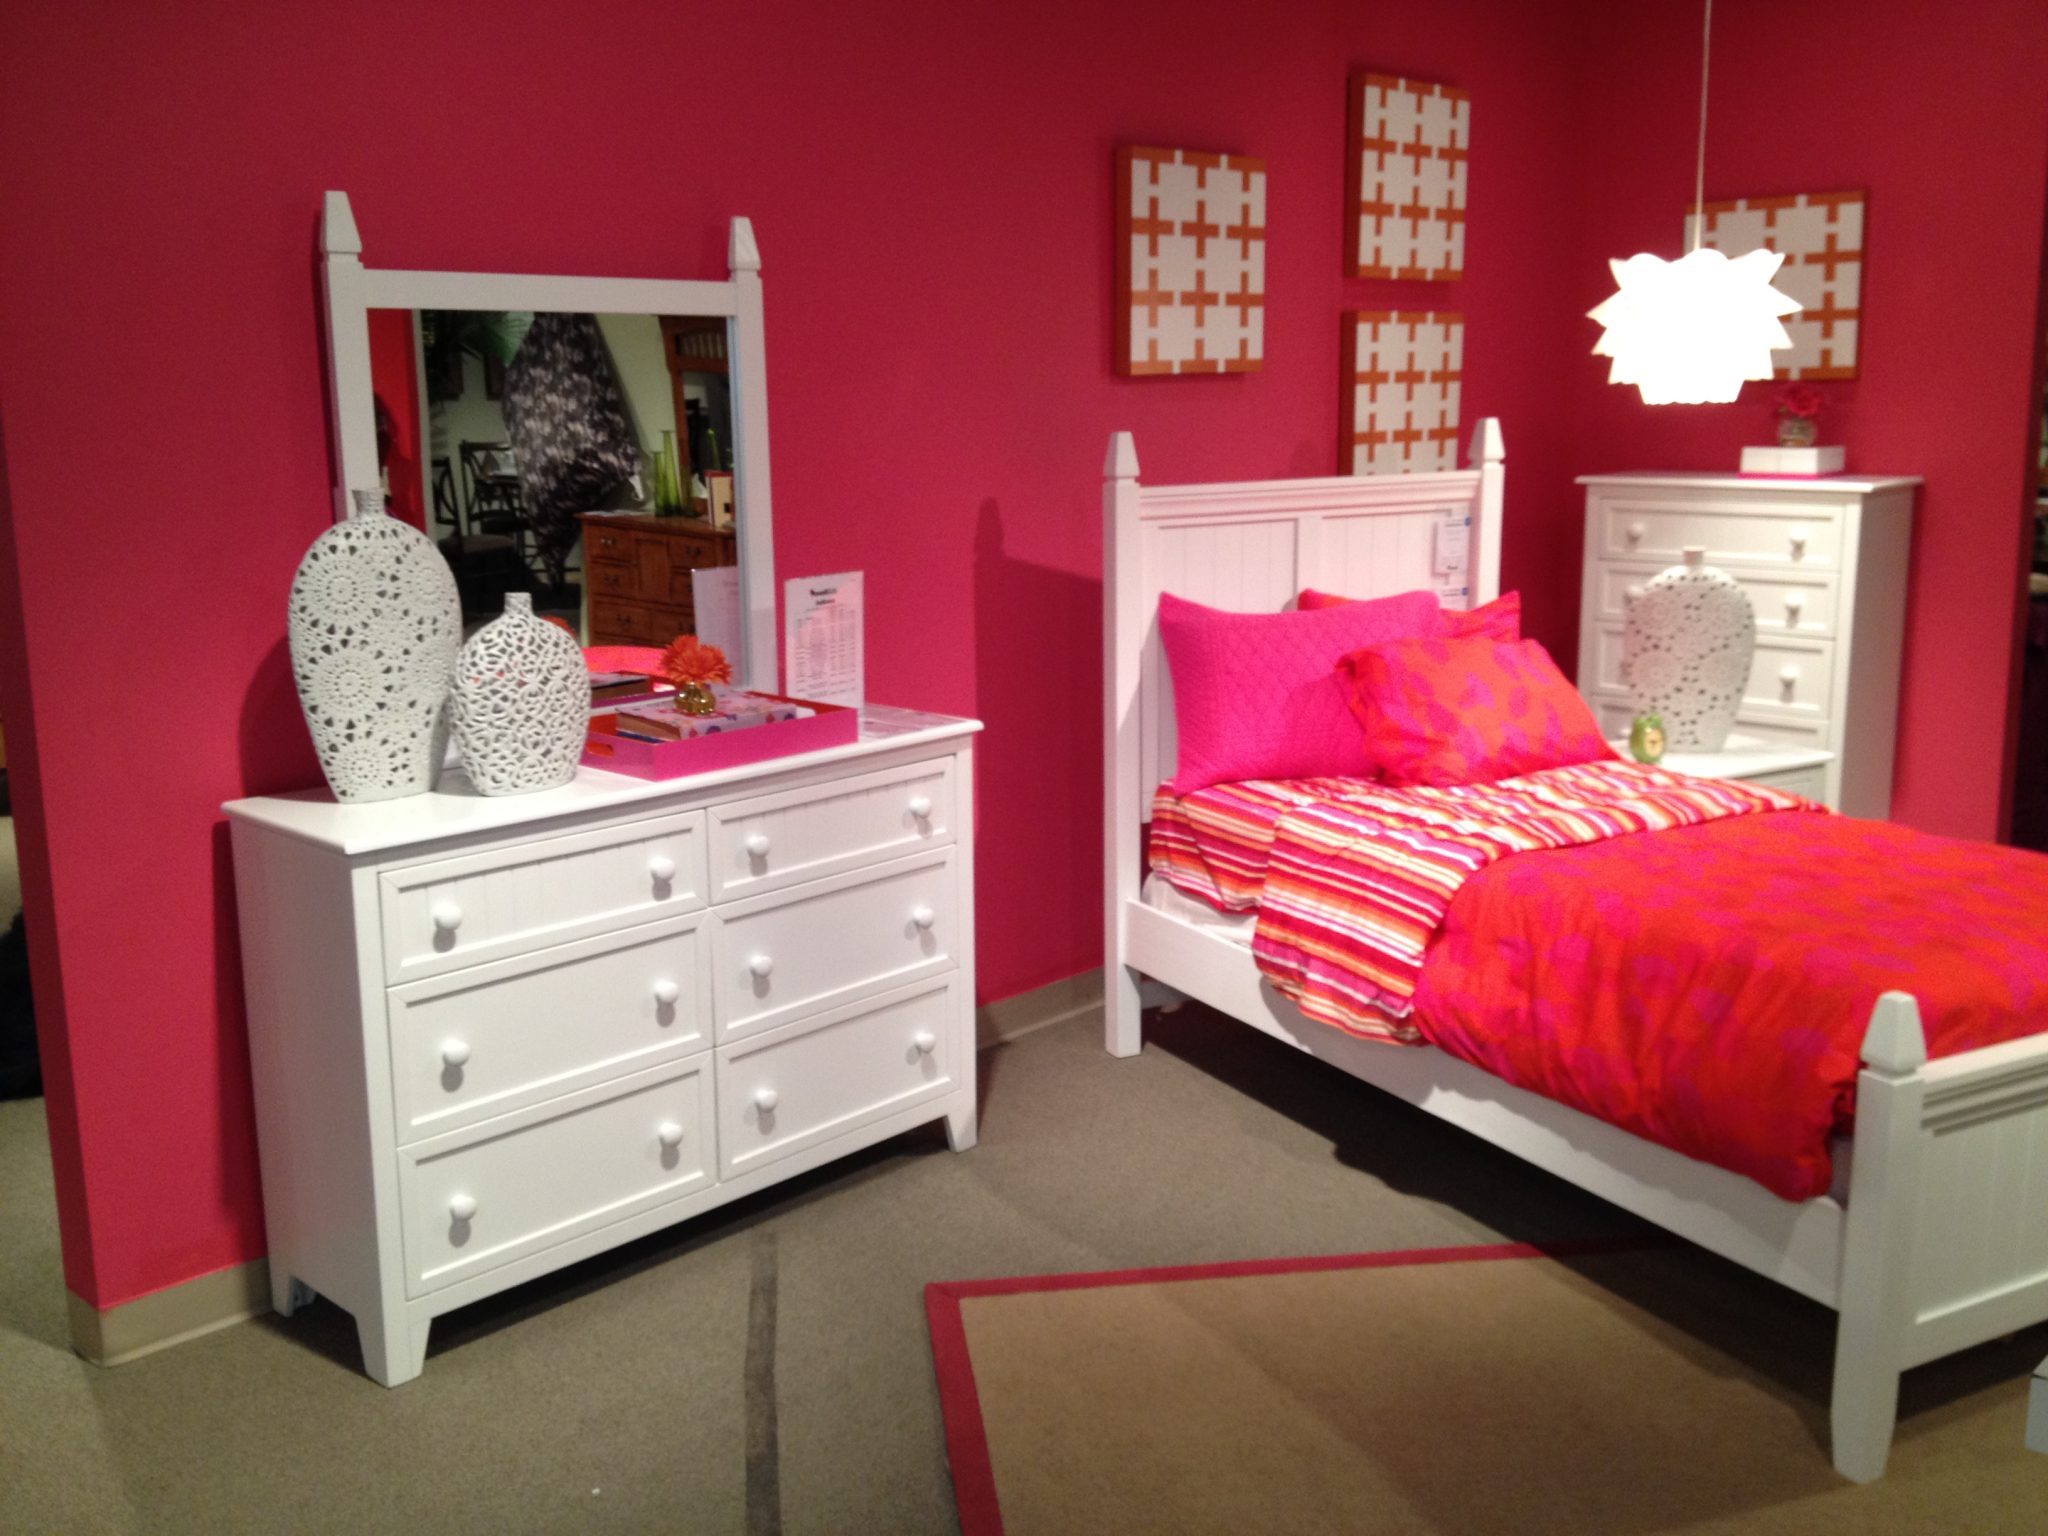 new-white-twin-bed-at-totally-kids-fun-furniture-and-toys